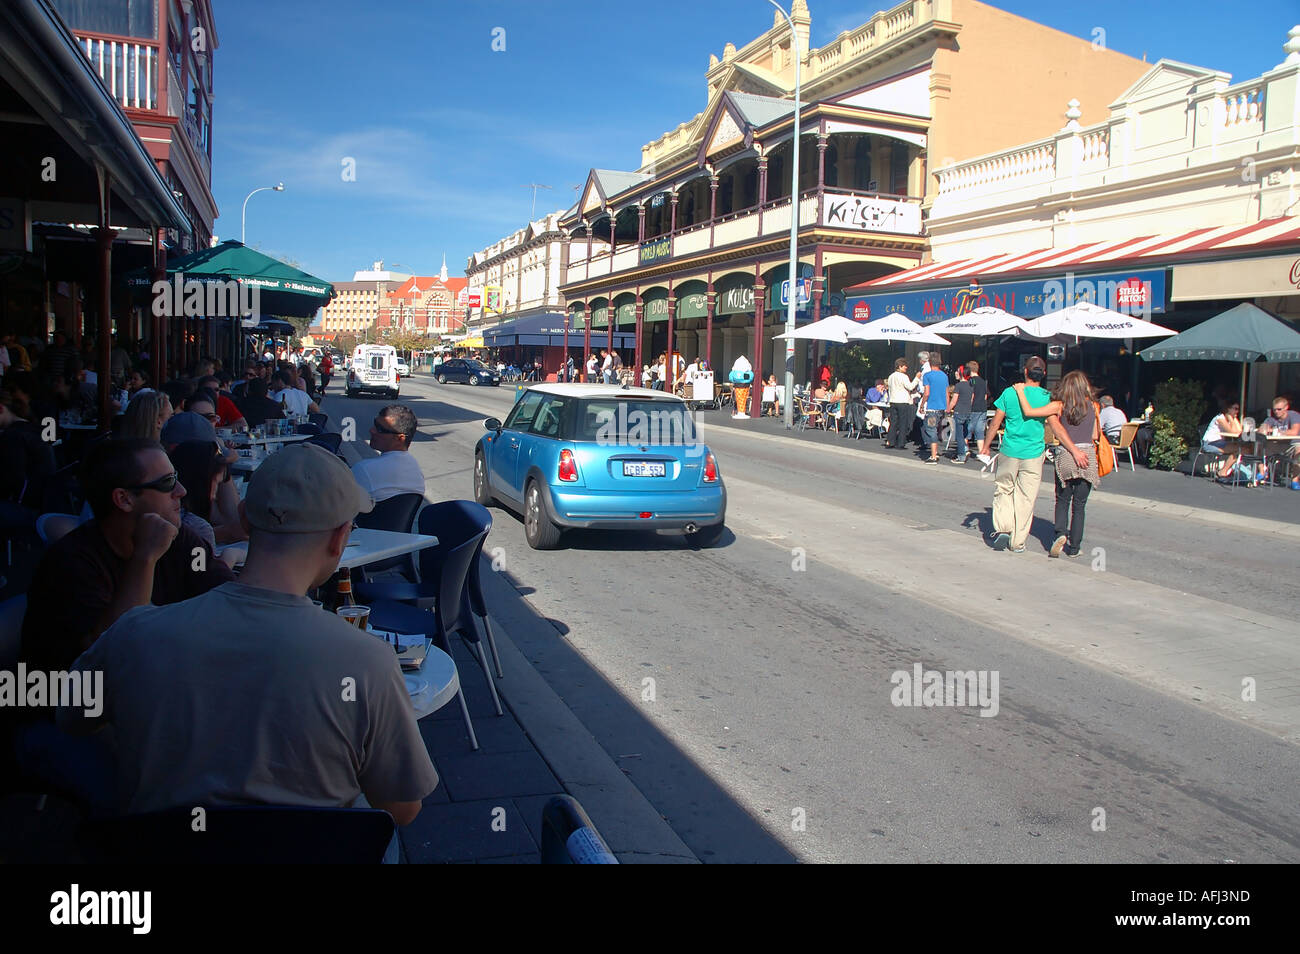 Busy outdoor cafes line the streets of Fremantle Perth Western Australia No MR or PR Stock Photo